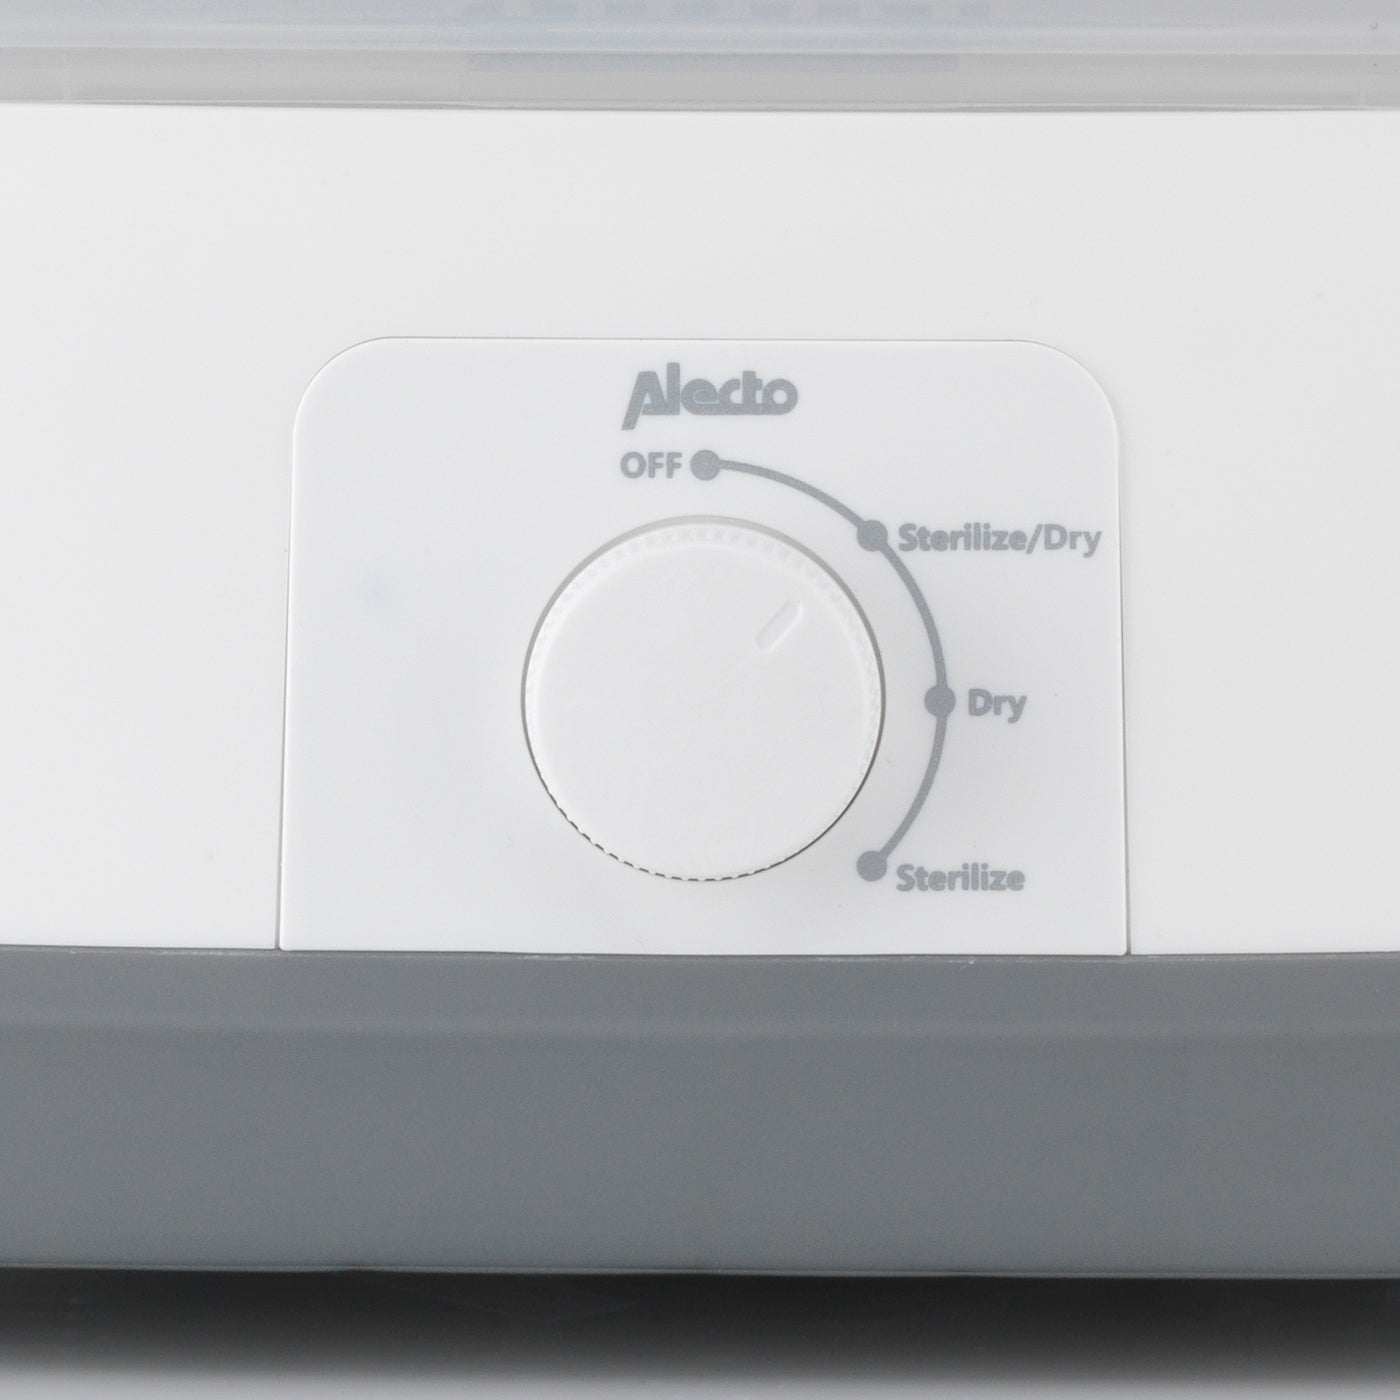 Alecto BF55 - Electric steam sterilizer with drying function